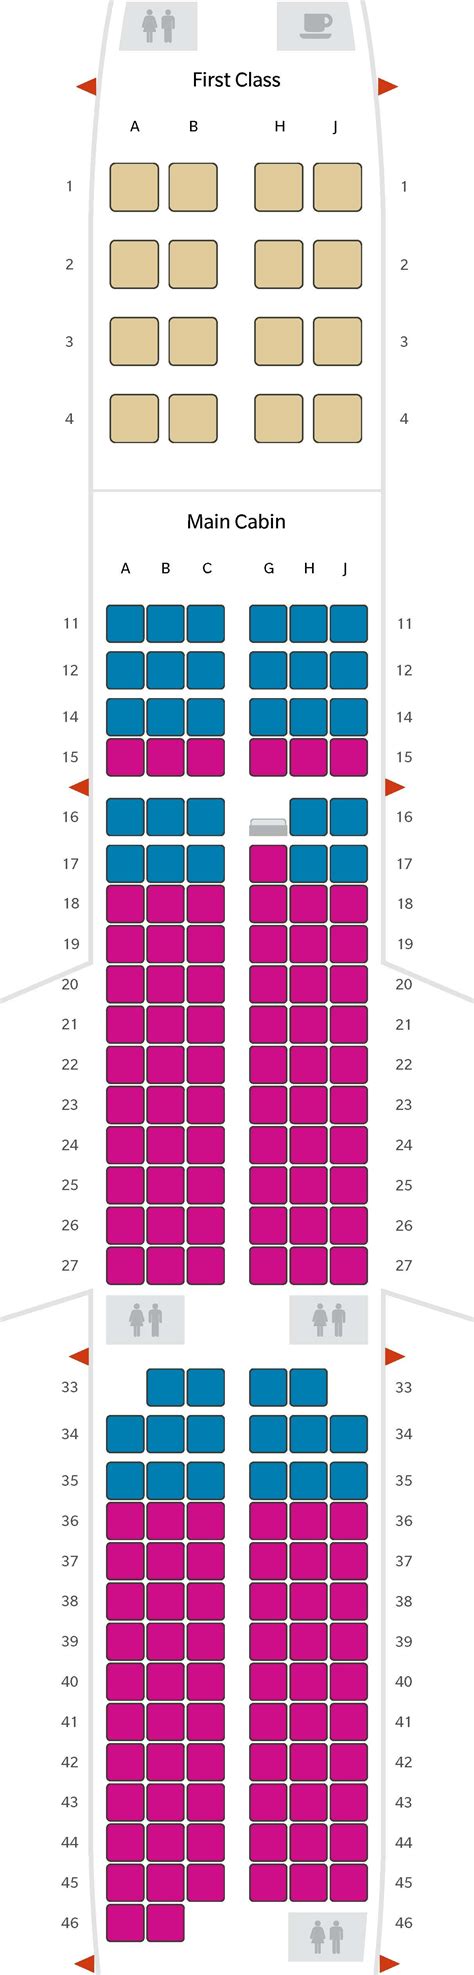 8 Pics Airbus A330 Seating Chart United Airlines And Description Alqu F53